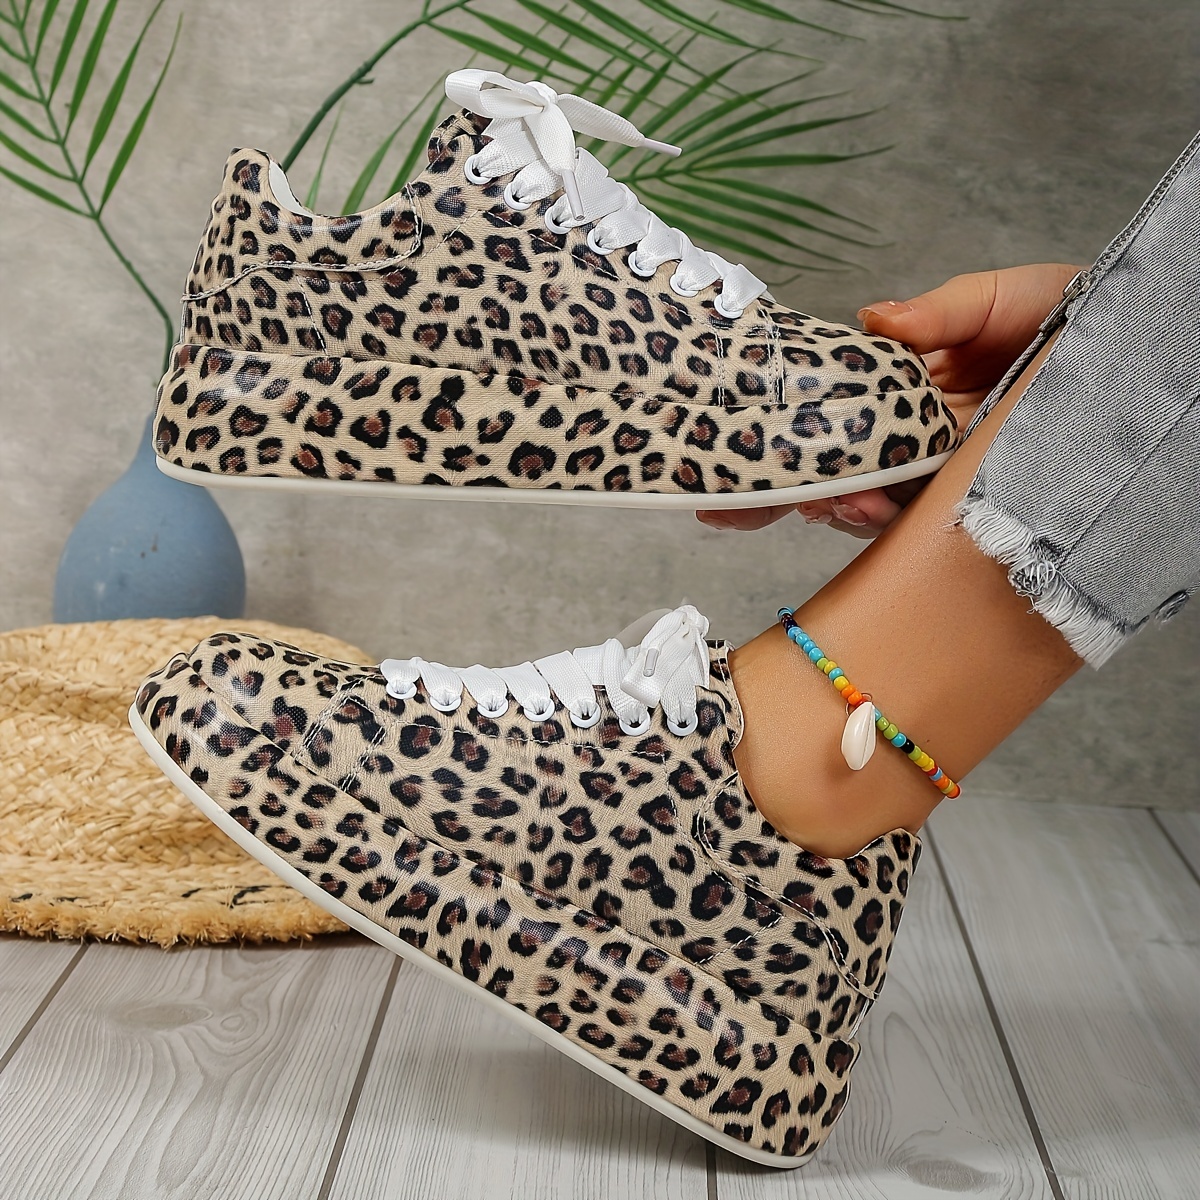 Women's Leopard Print Platform Sneakers, Lace Up Low-top Round Toe Casual  Shoes, Outdoor Comfy Daily Shoes